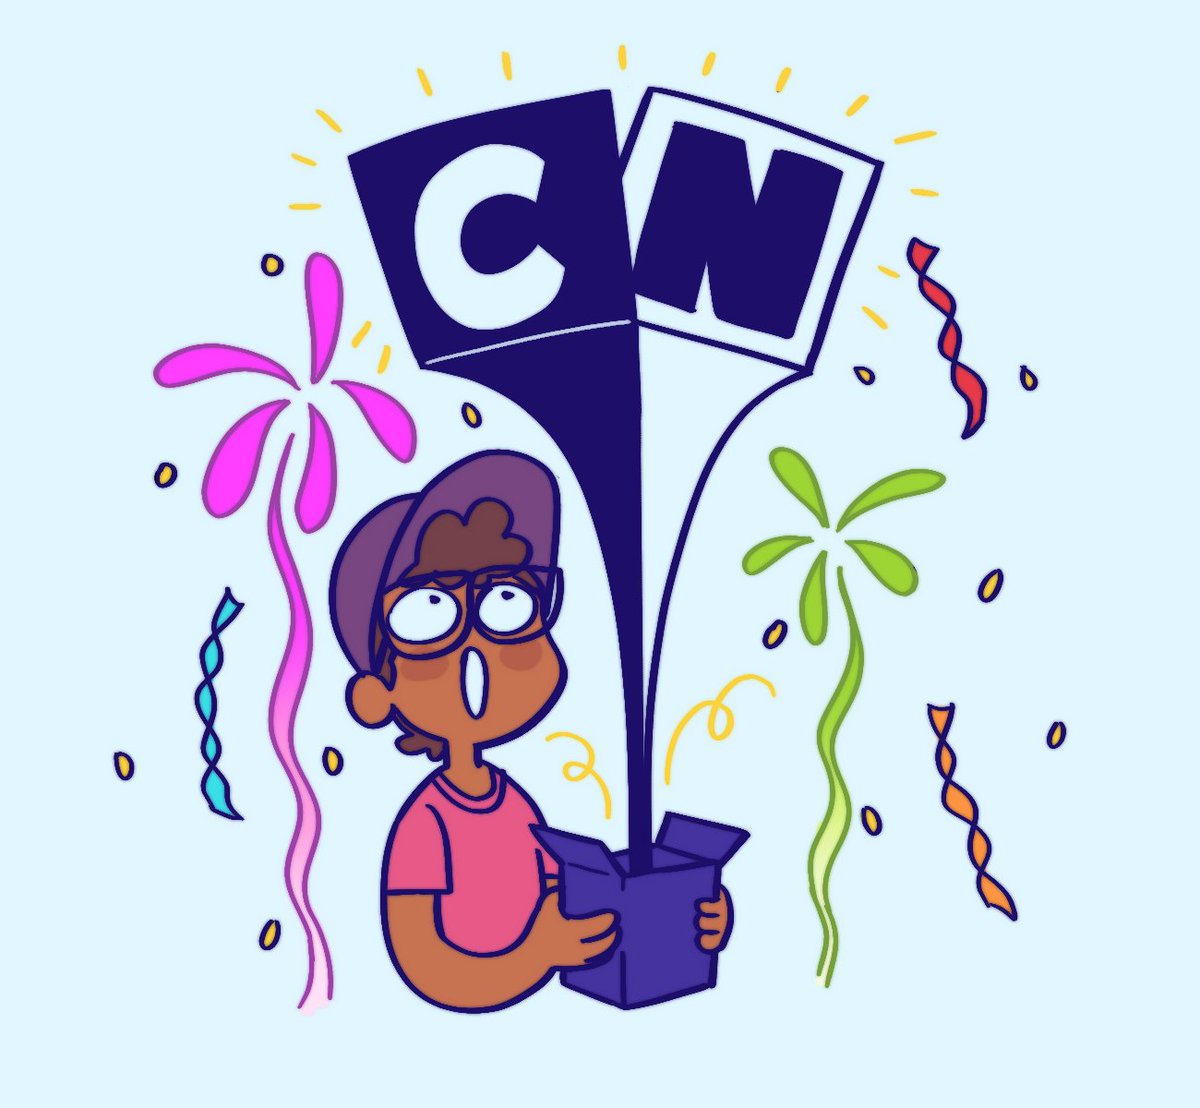 SURPRISE?!?!?!! 🥳 Today is my first day working at Cartoon Network as a full time prop designer! I still can't believe it's really happening...thank you for your support everyone!!!! I'll do my best!!!!! 💪🏾😭